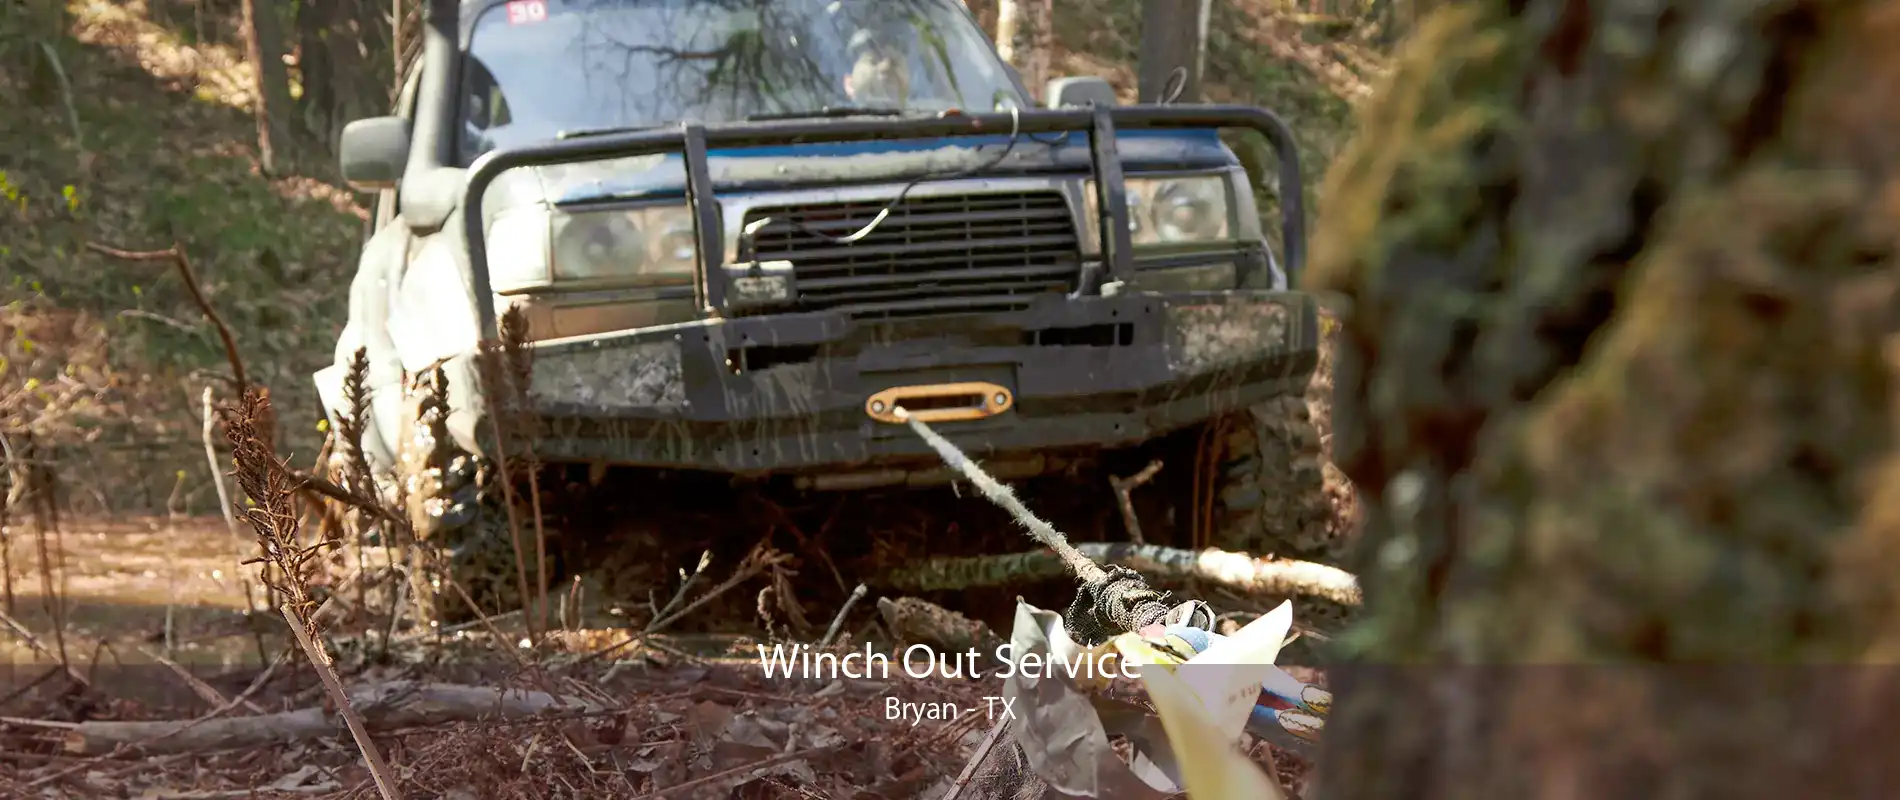 Winch Out Service Bryan - TX